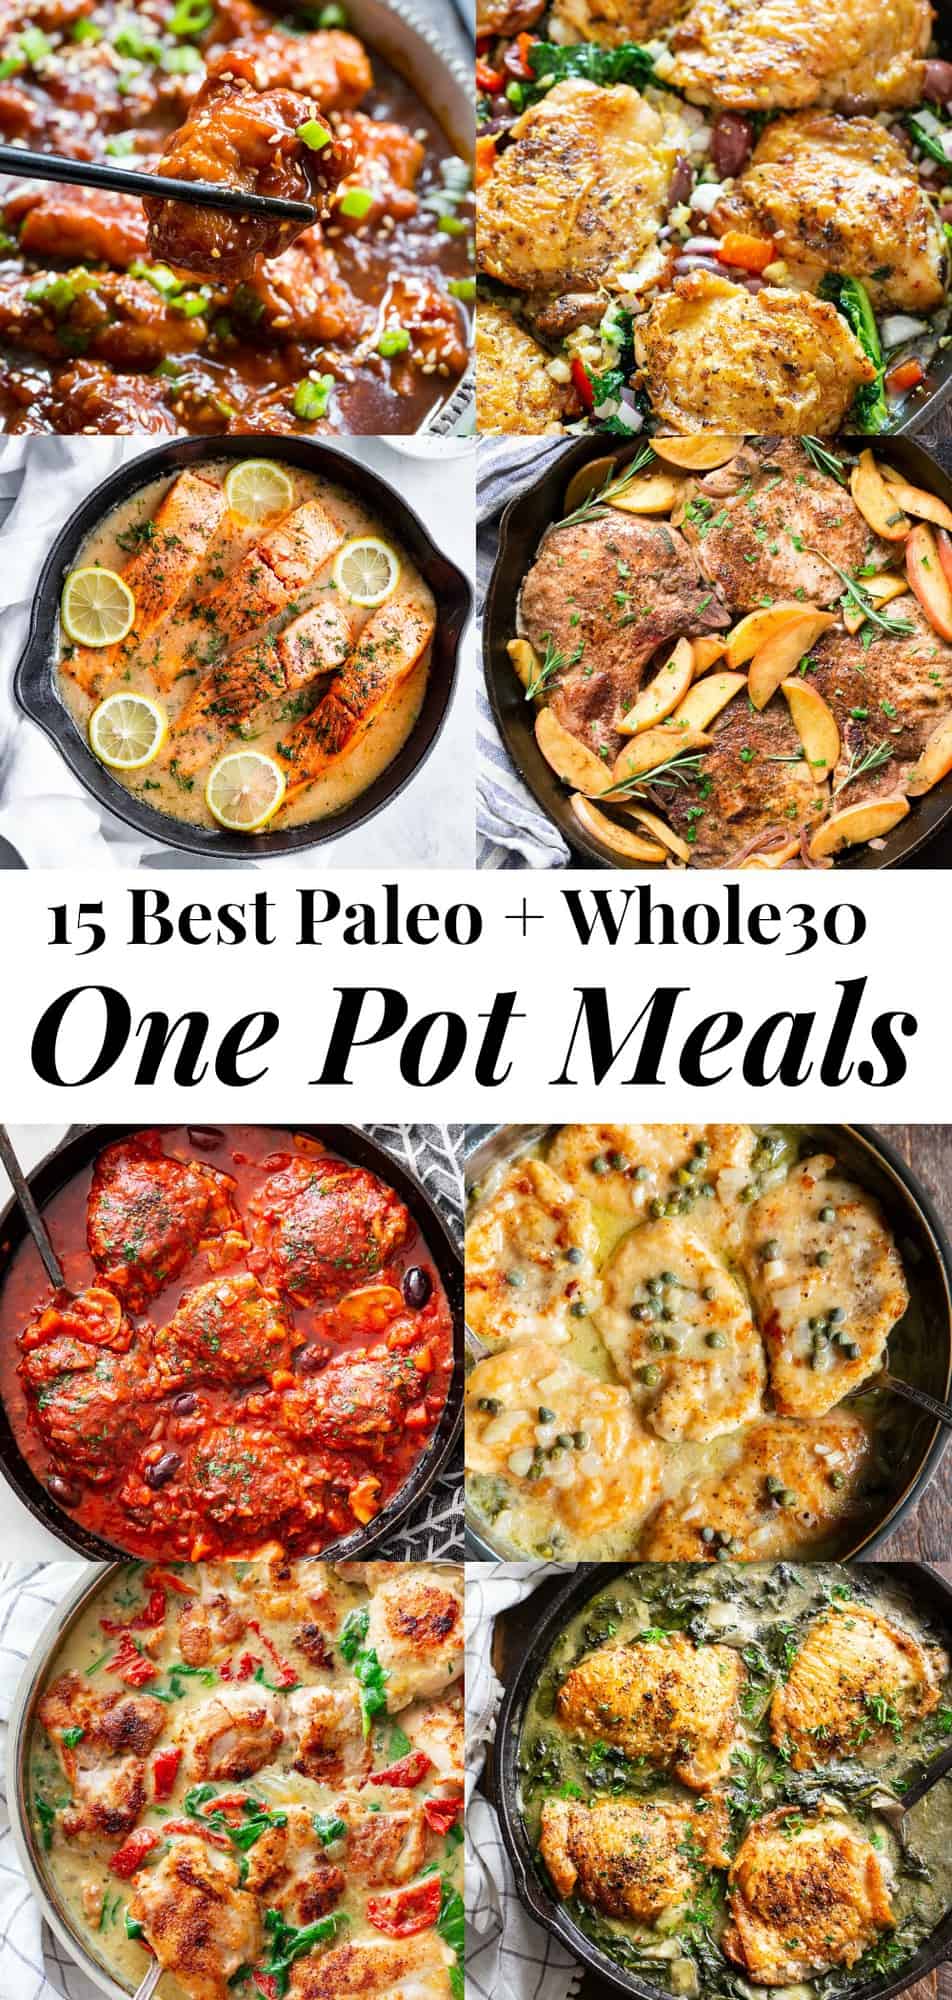 15 One Pot Paleo Meals - The Paleo Running Momma